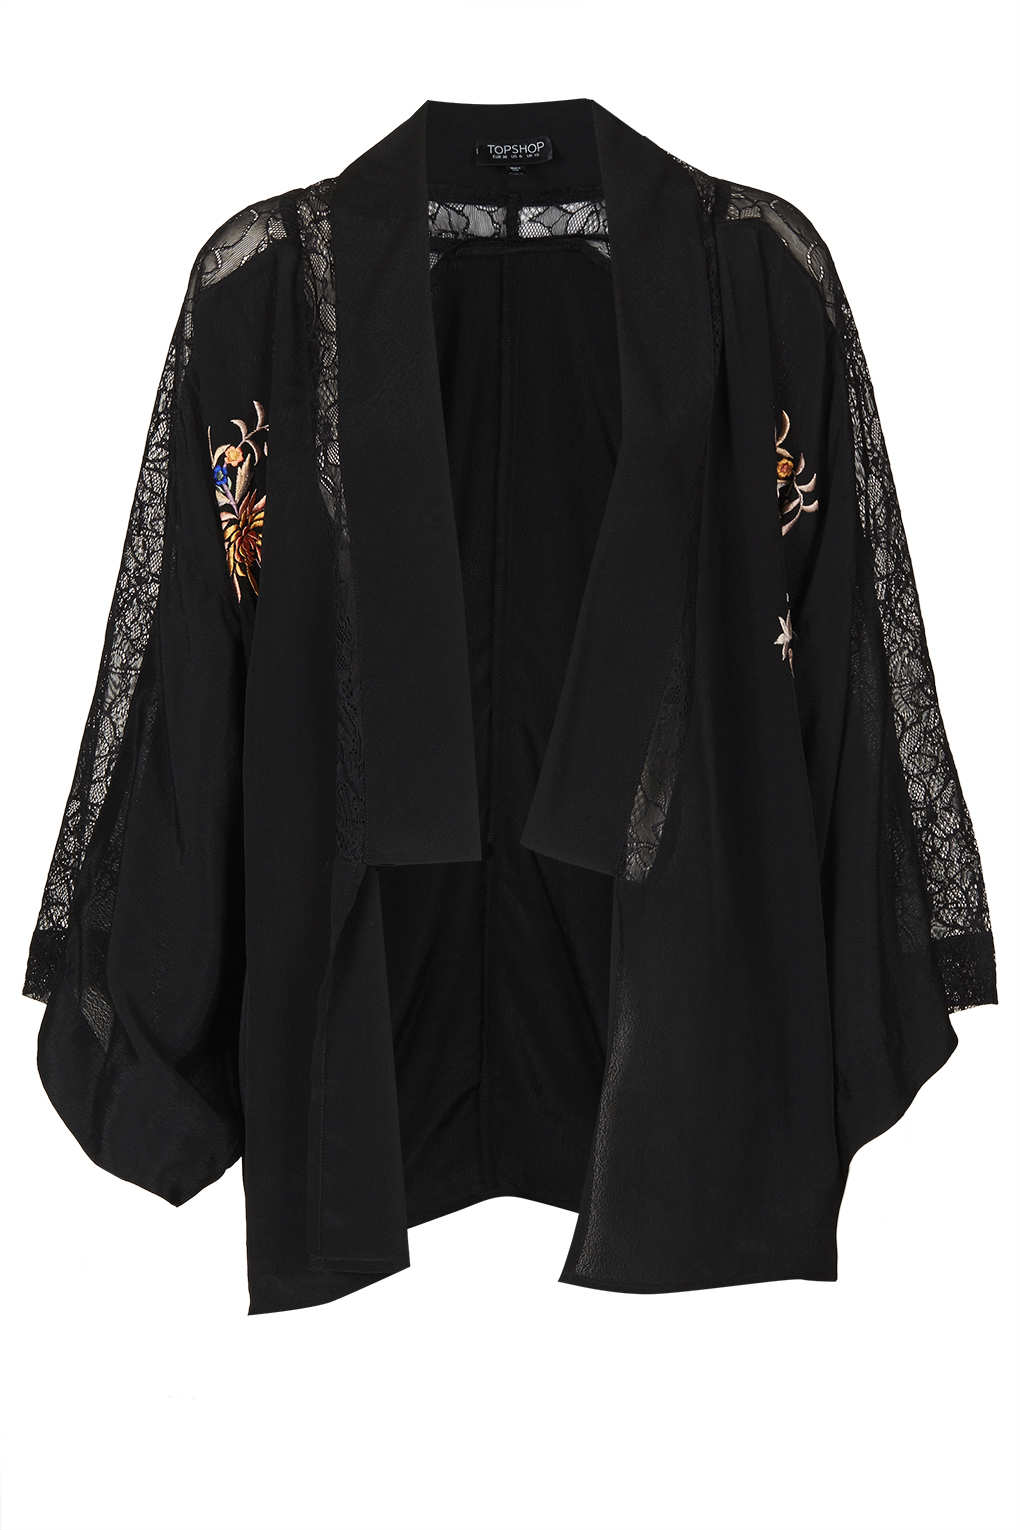 TOPSHOP Lace Embroidered Kimono in Black - Lyst